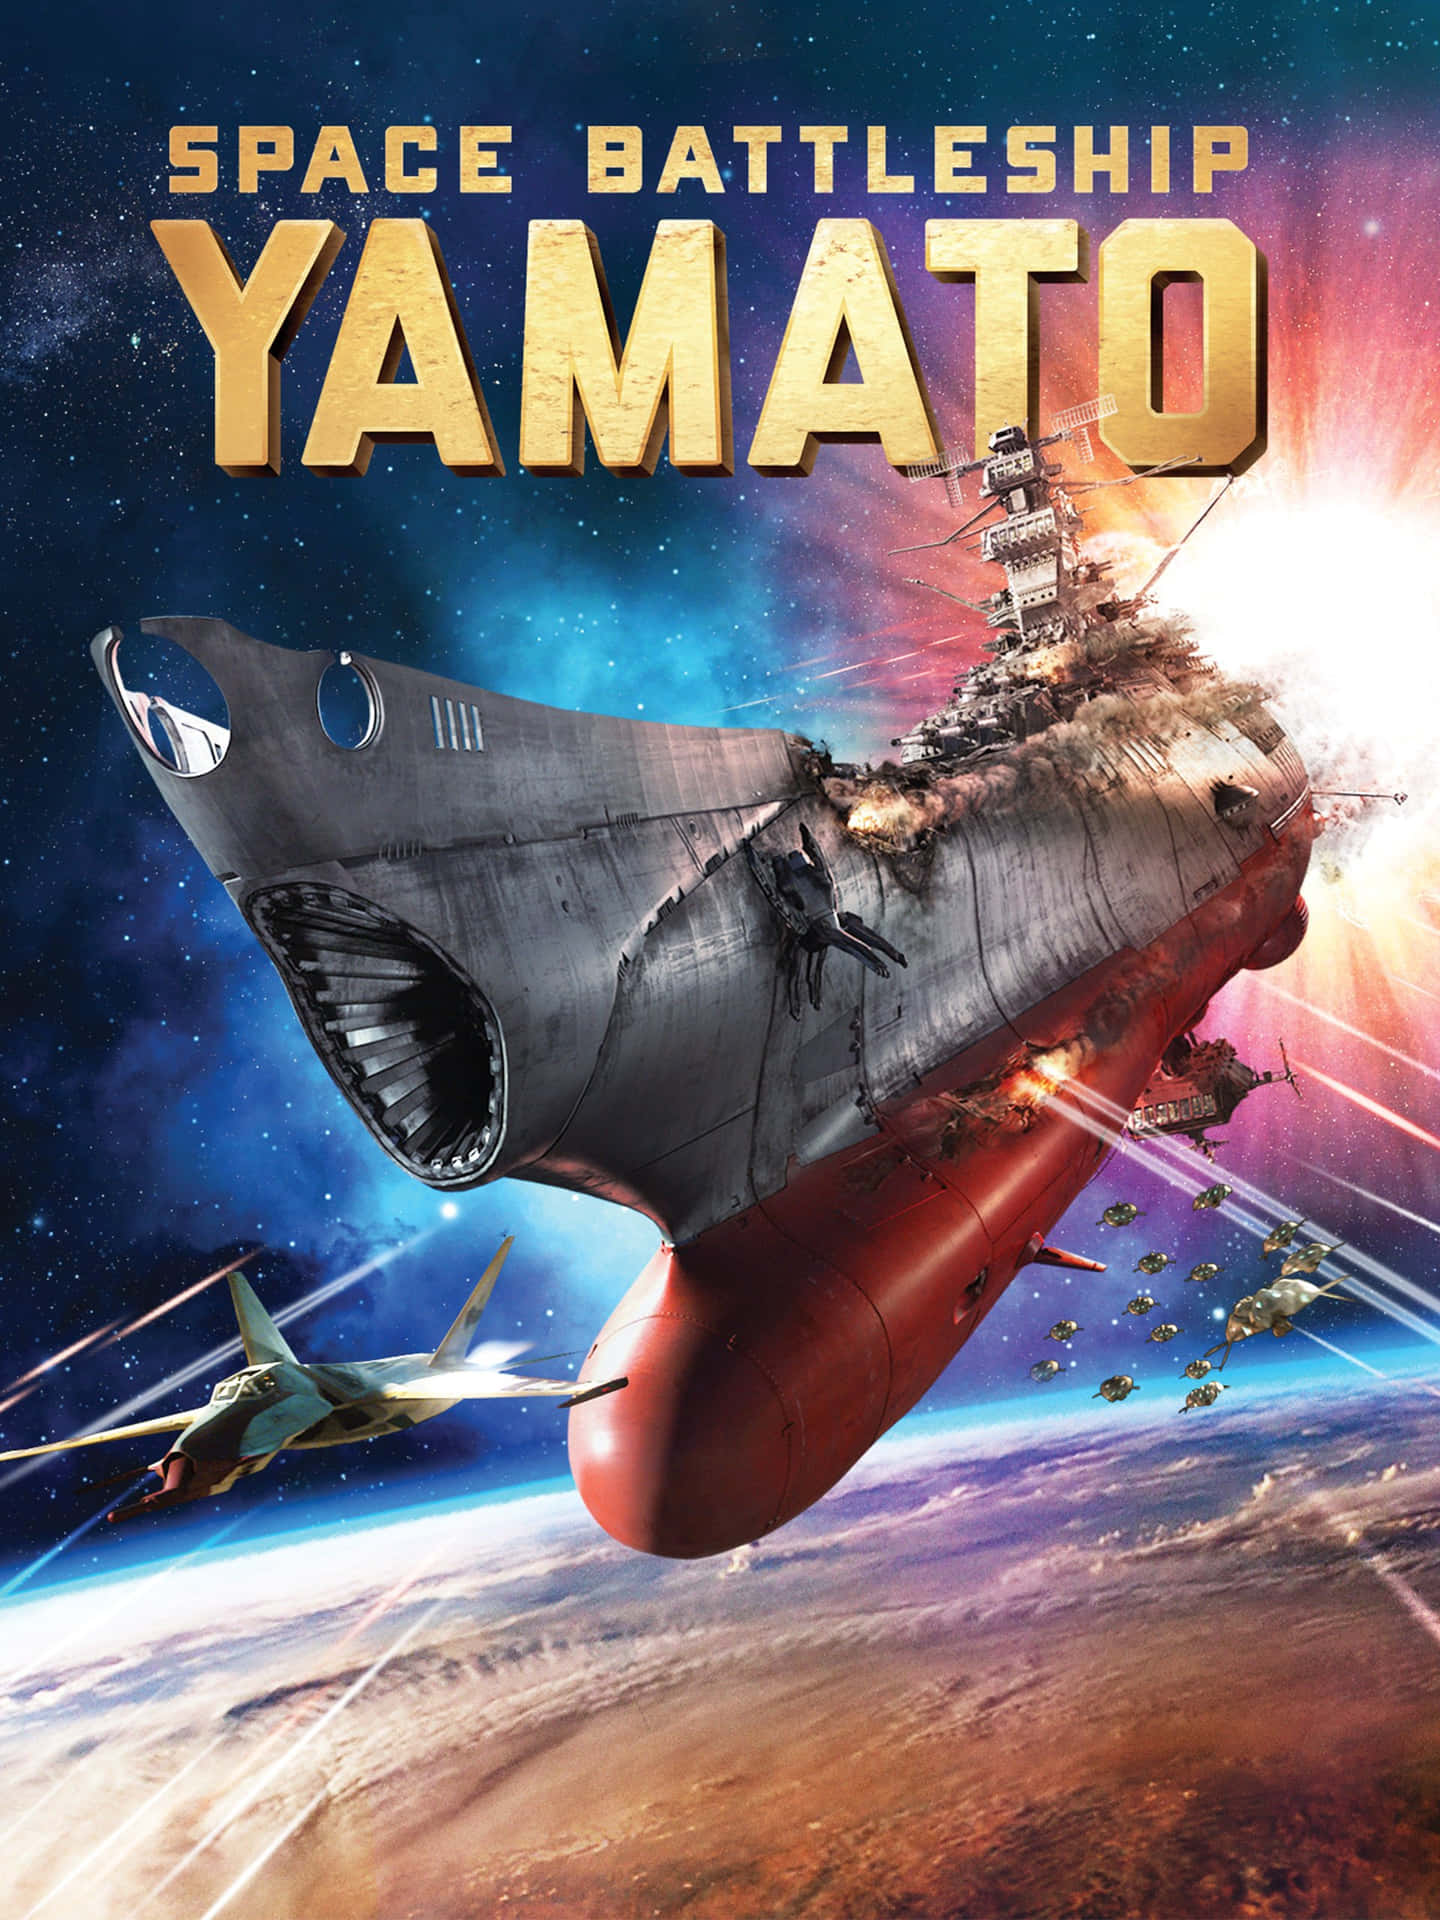 “Explore space with the iconic Space Battleship Yamato” Wallpaper